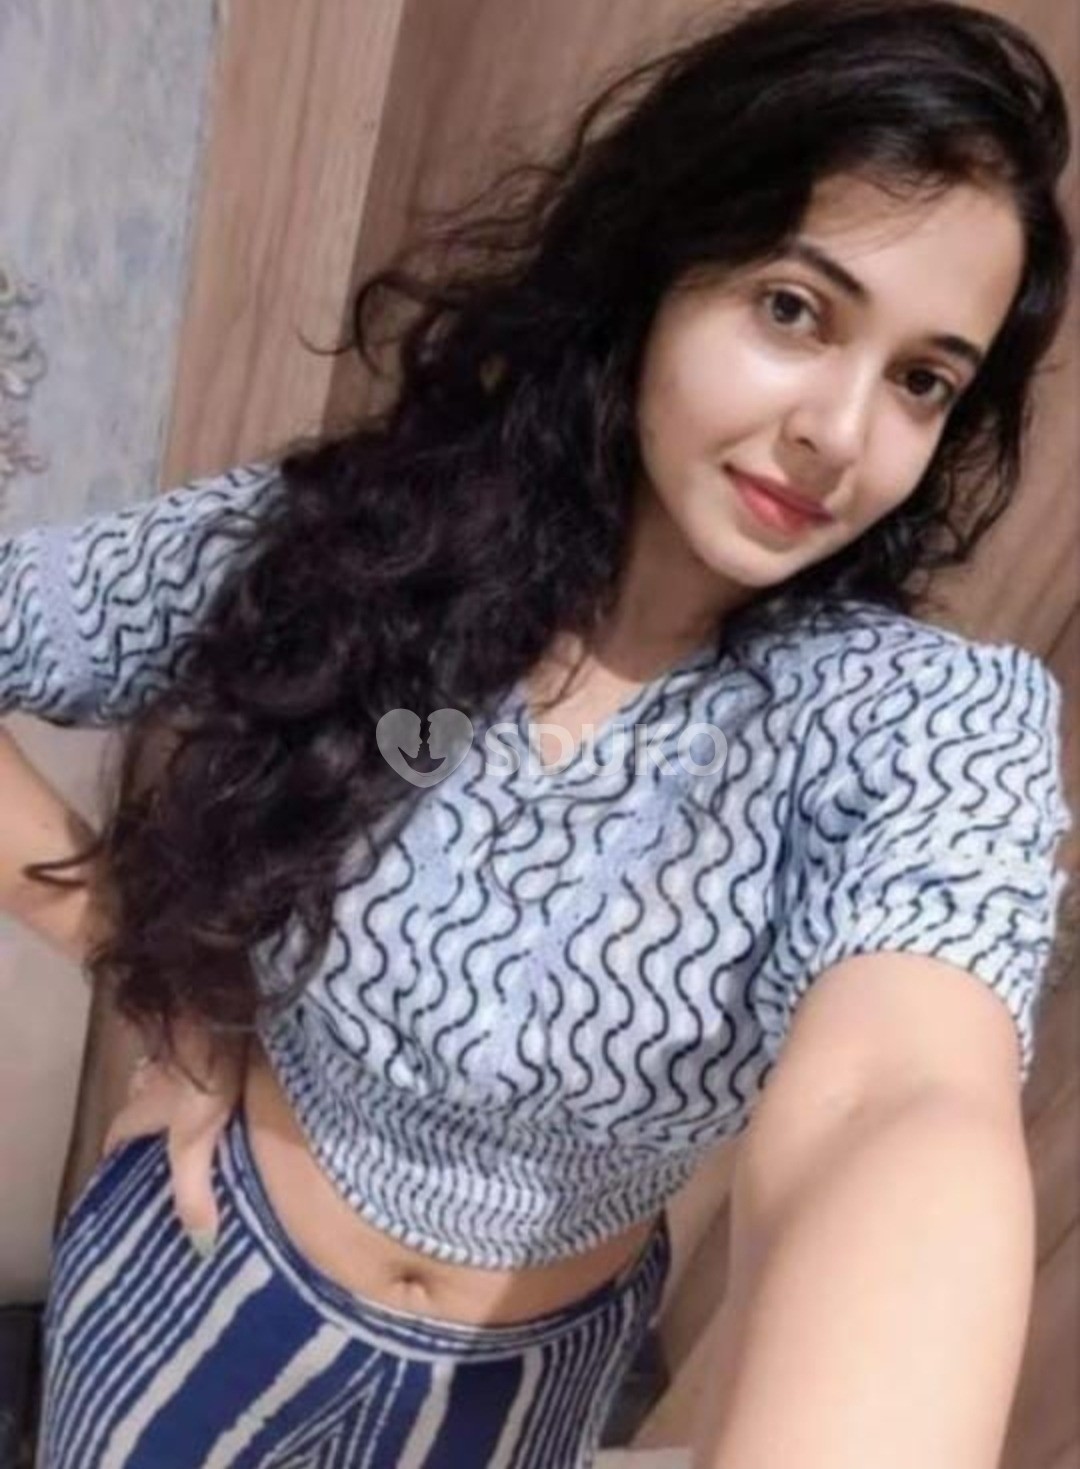 Noida LOW PRICE🔸✅ll( 24×7 ) SERVICE A AVAILABLE 100% SAFE AND S SECURE UNLIMITED ENJOY HOT COLLEGE GIRL HOUSEWIFE 